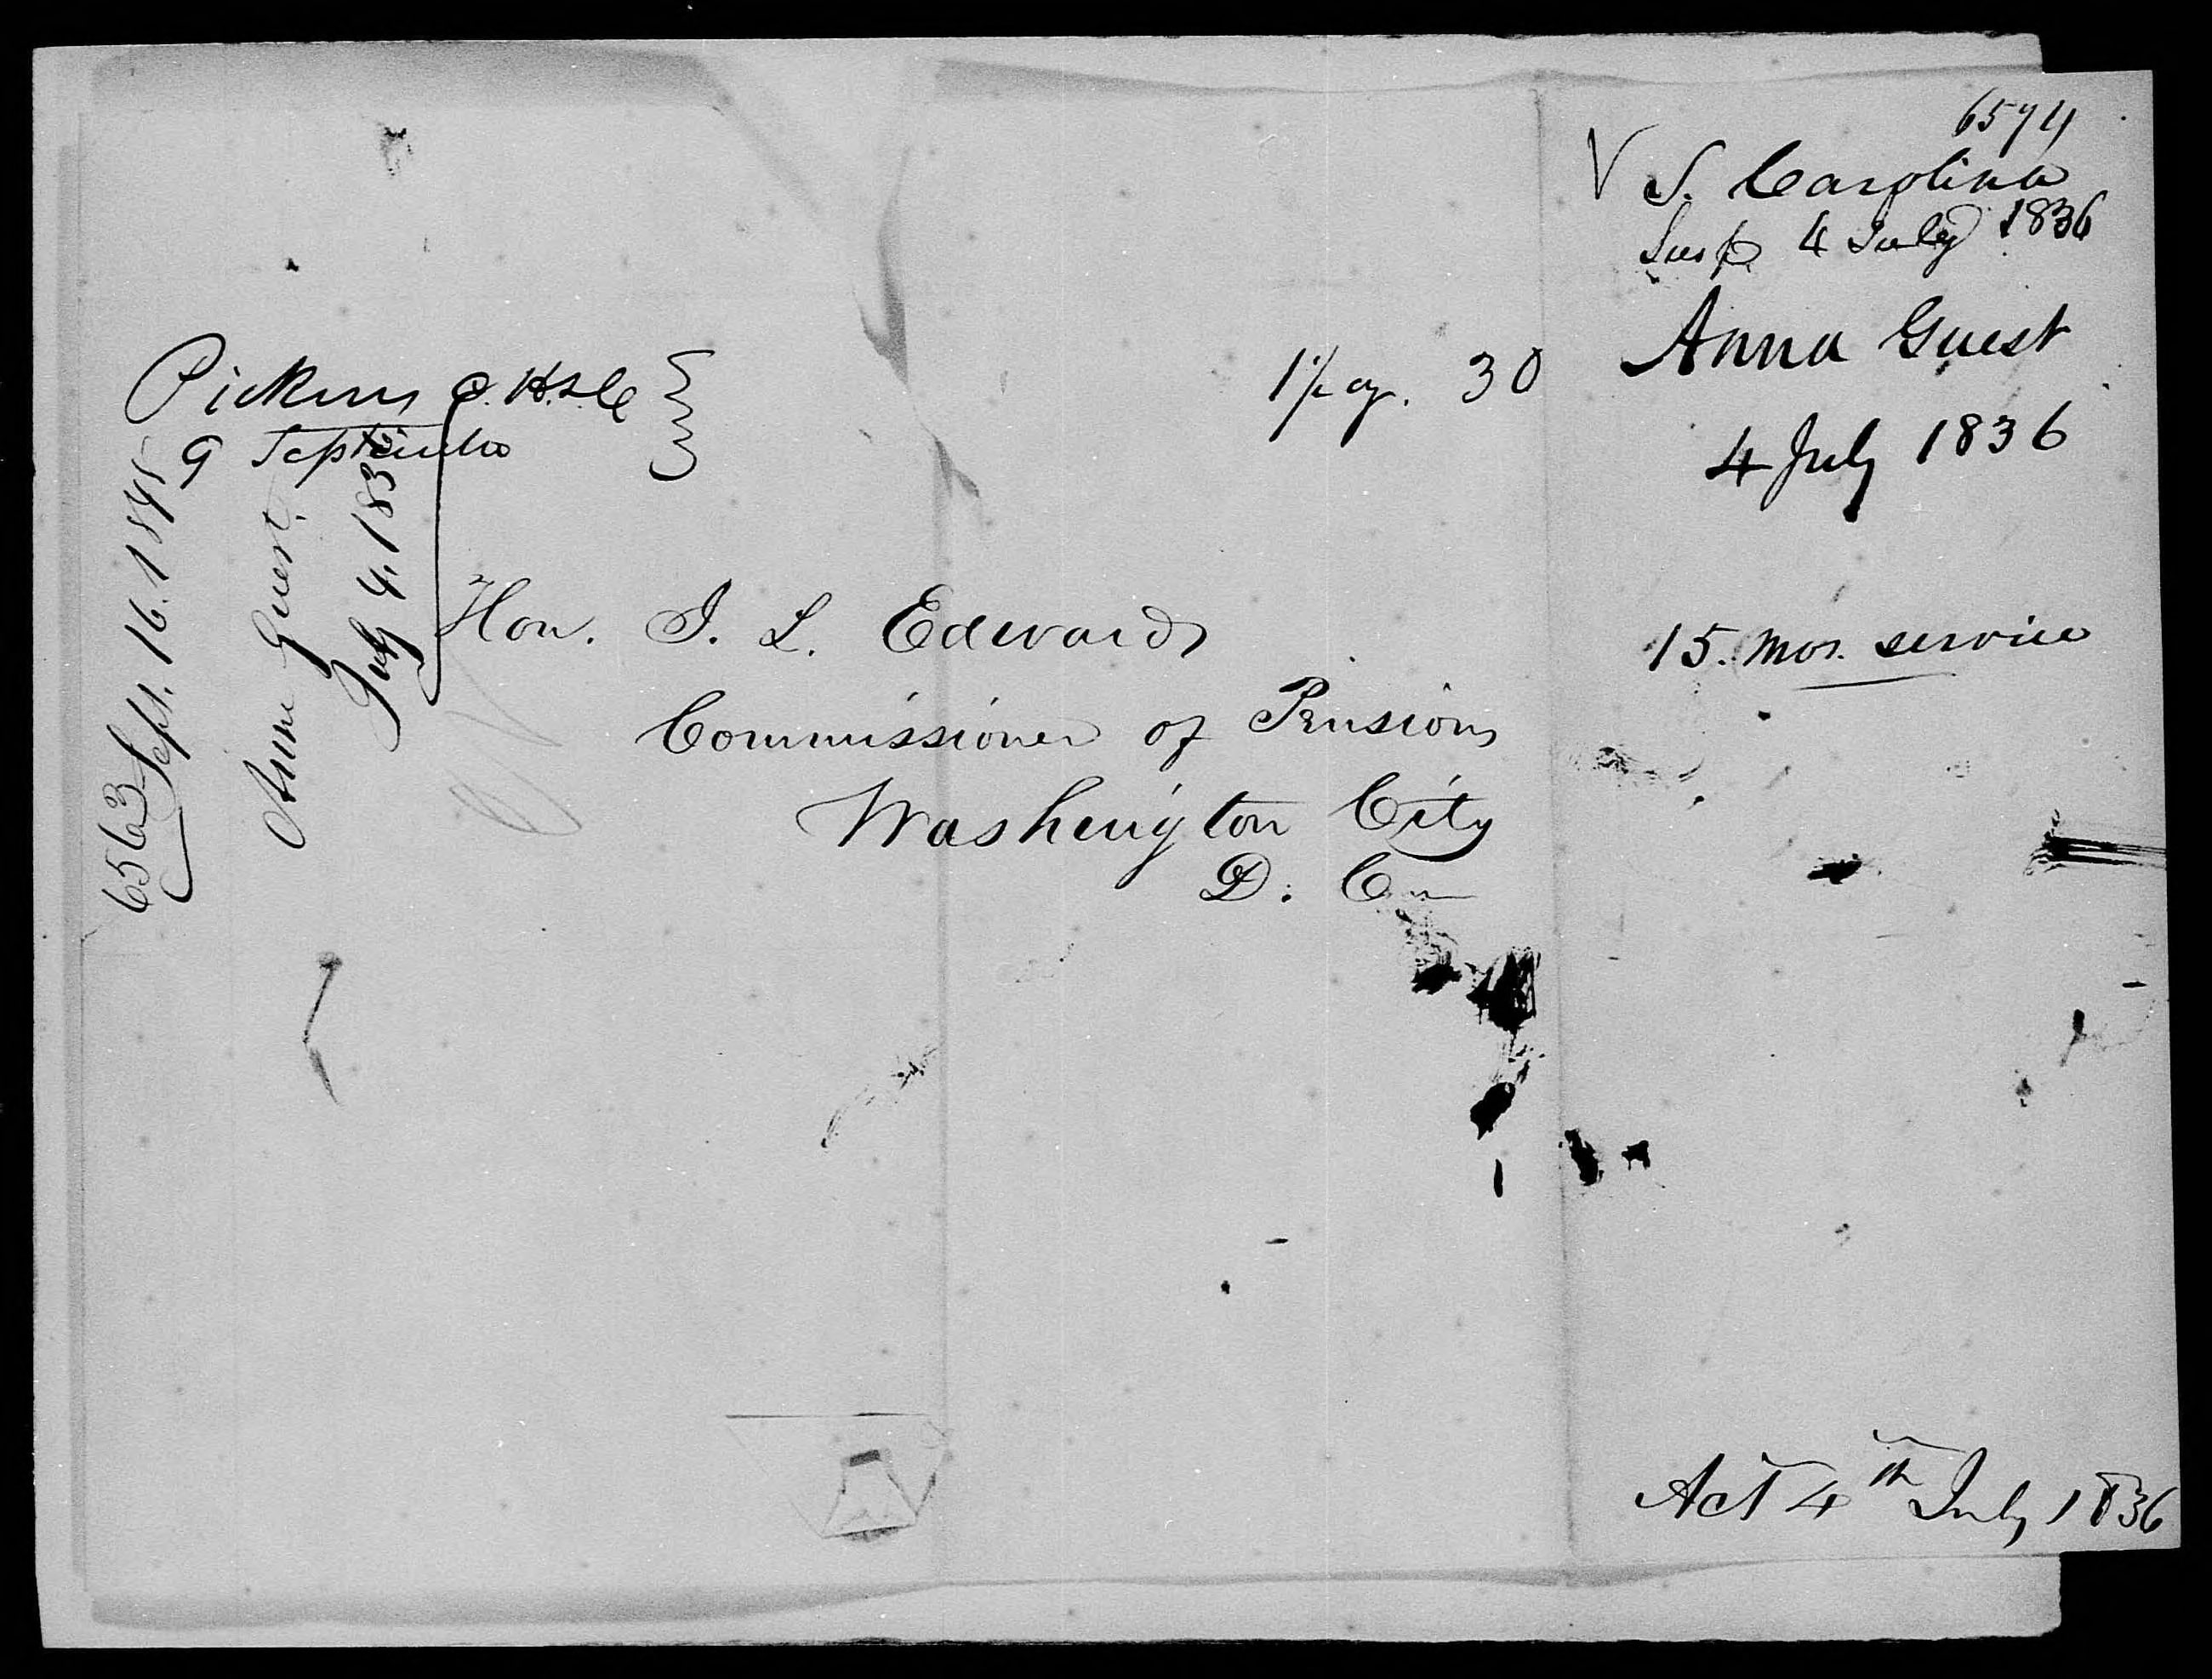 Affidavit of Elijah Keese in support of a Pension Claim for Anna Guest, 4 September 1845, page 3